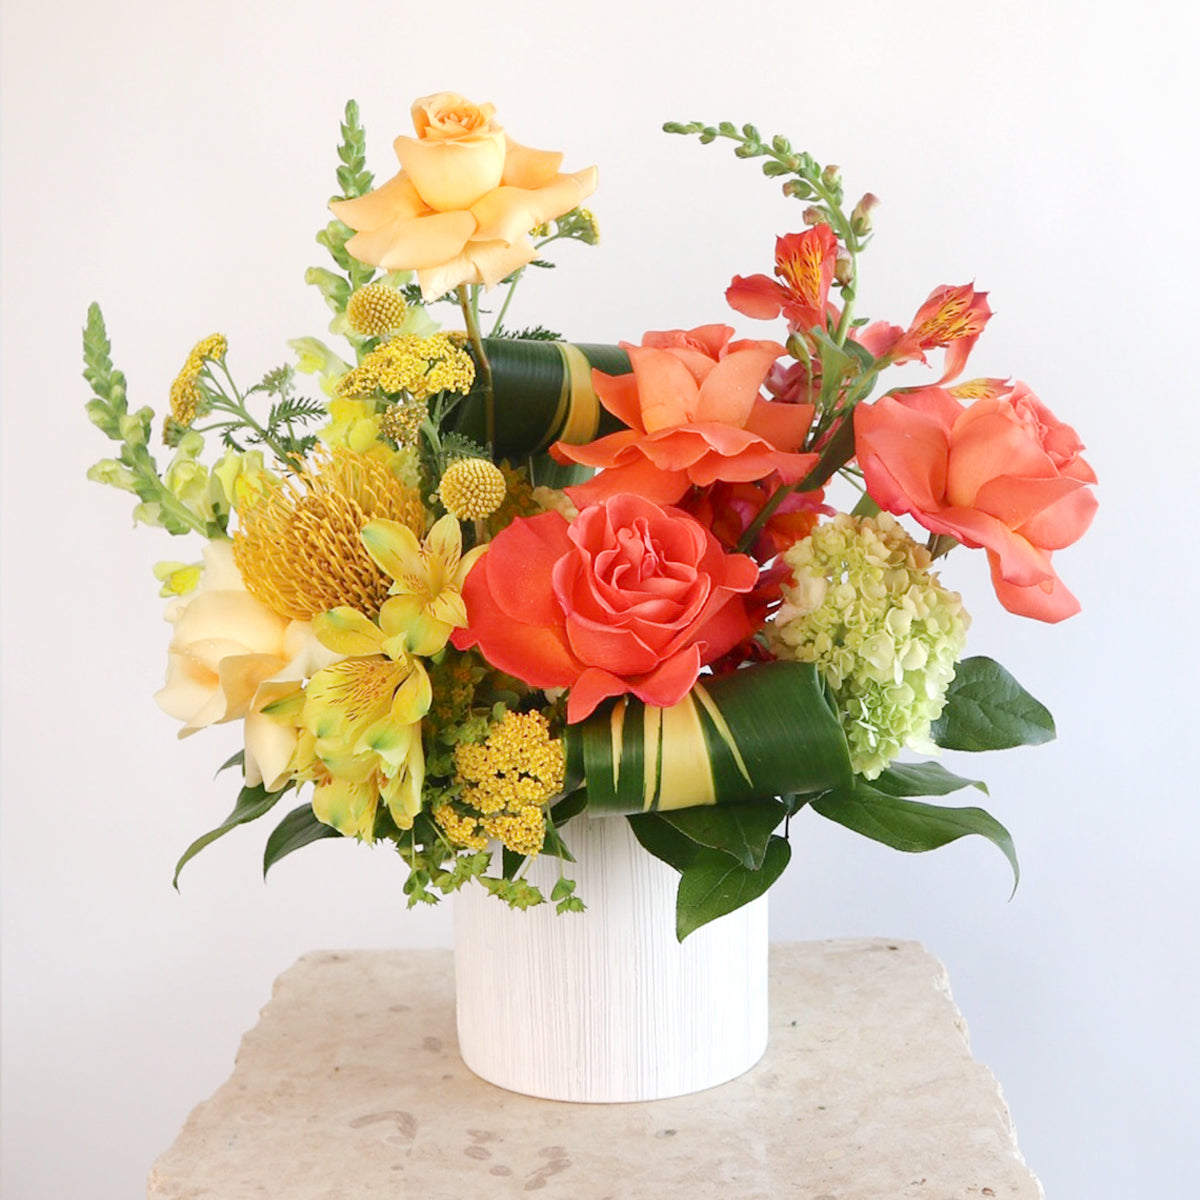 Designer Blooms Choice Vase - Bright and Cheerful